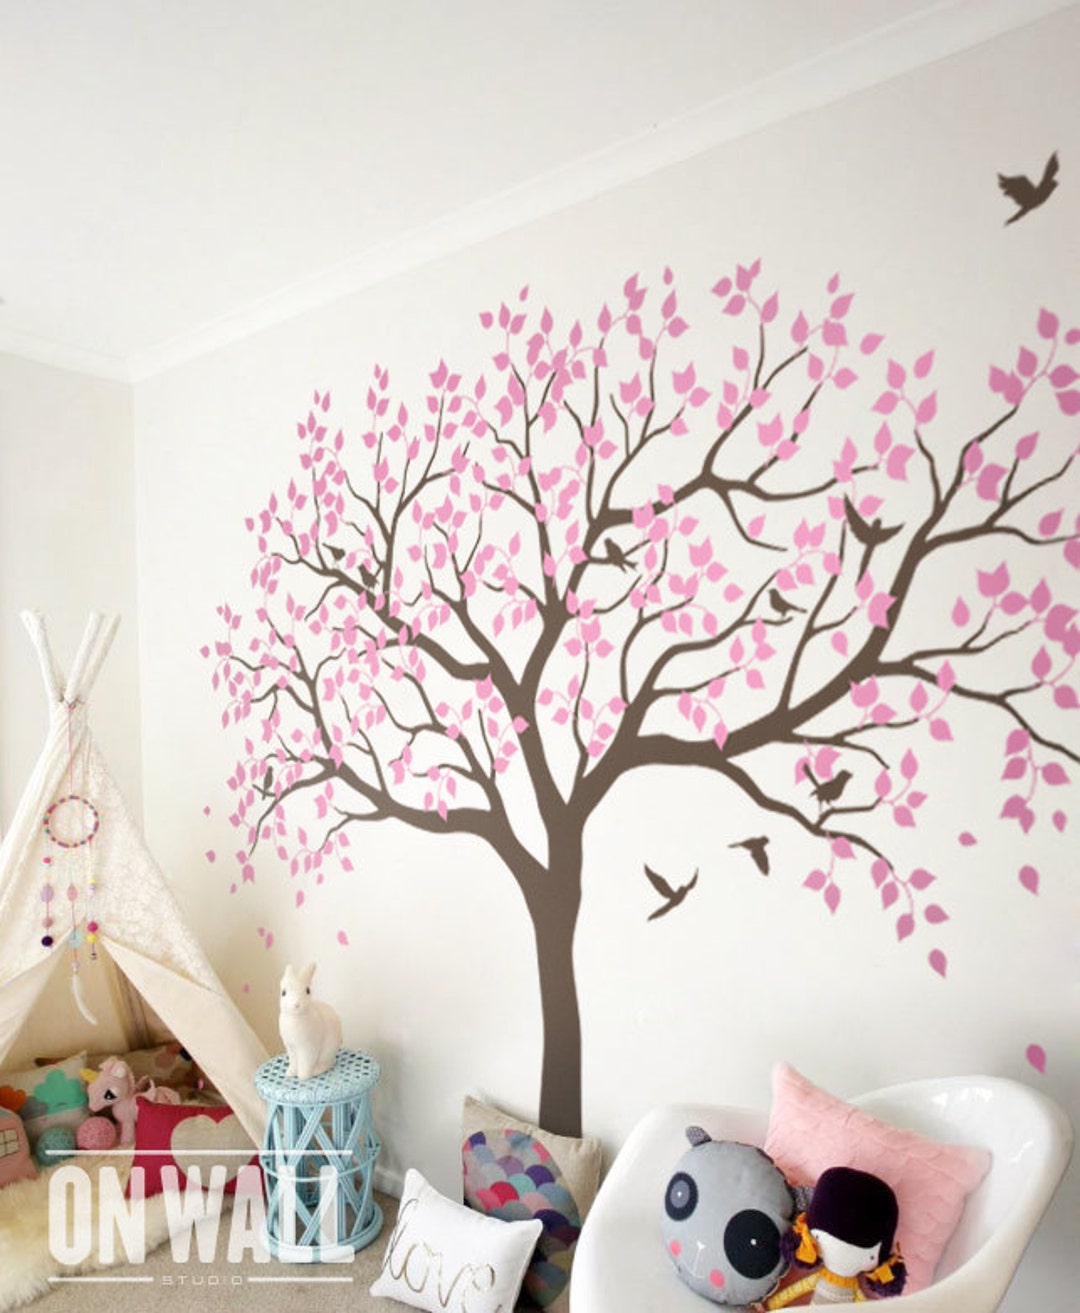 🥇 Wall stickers flowers and hummingbird 🥇